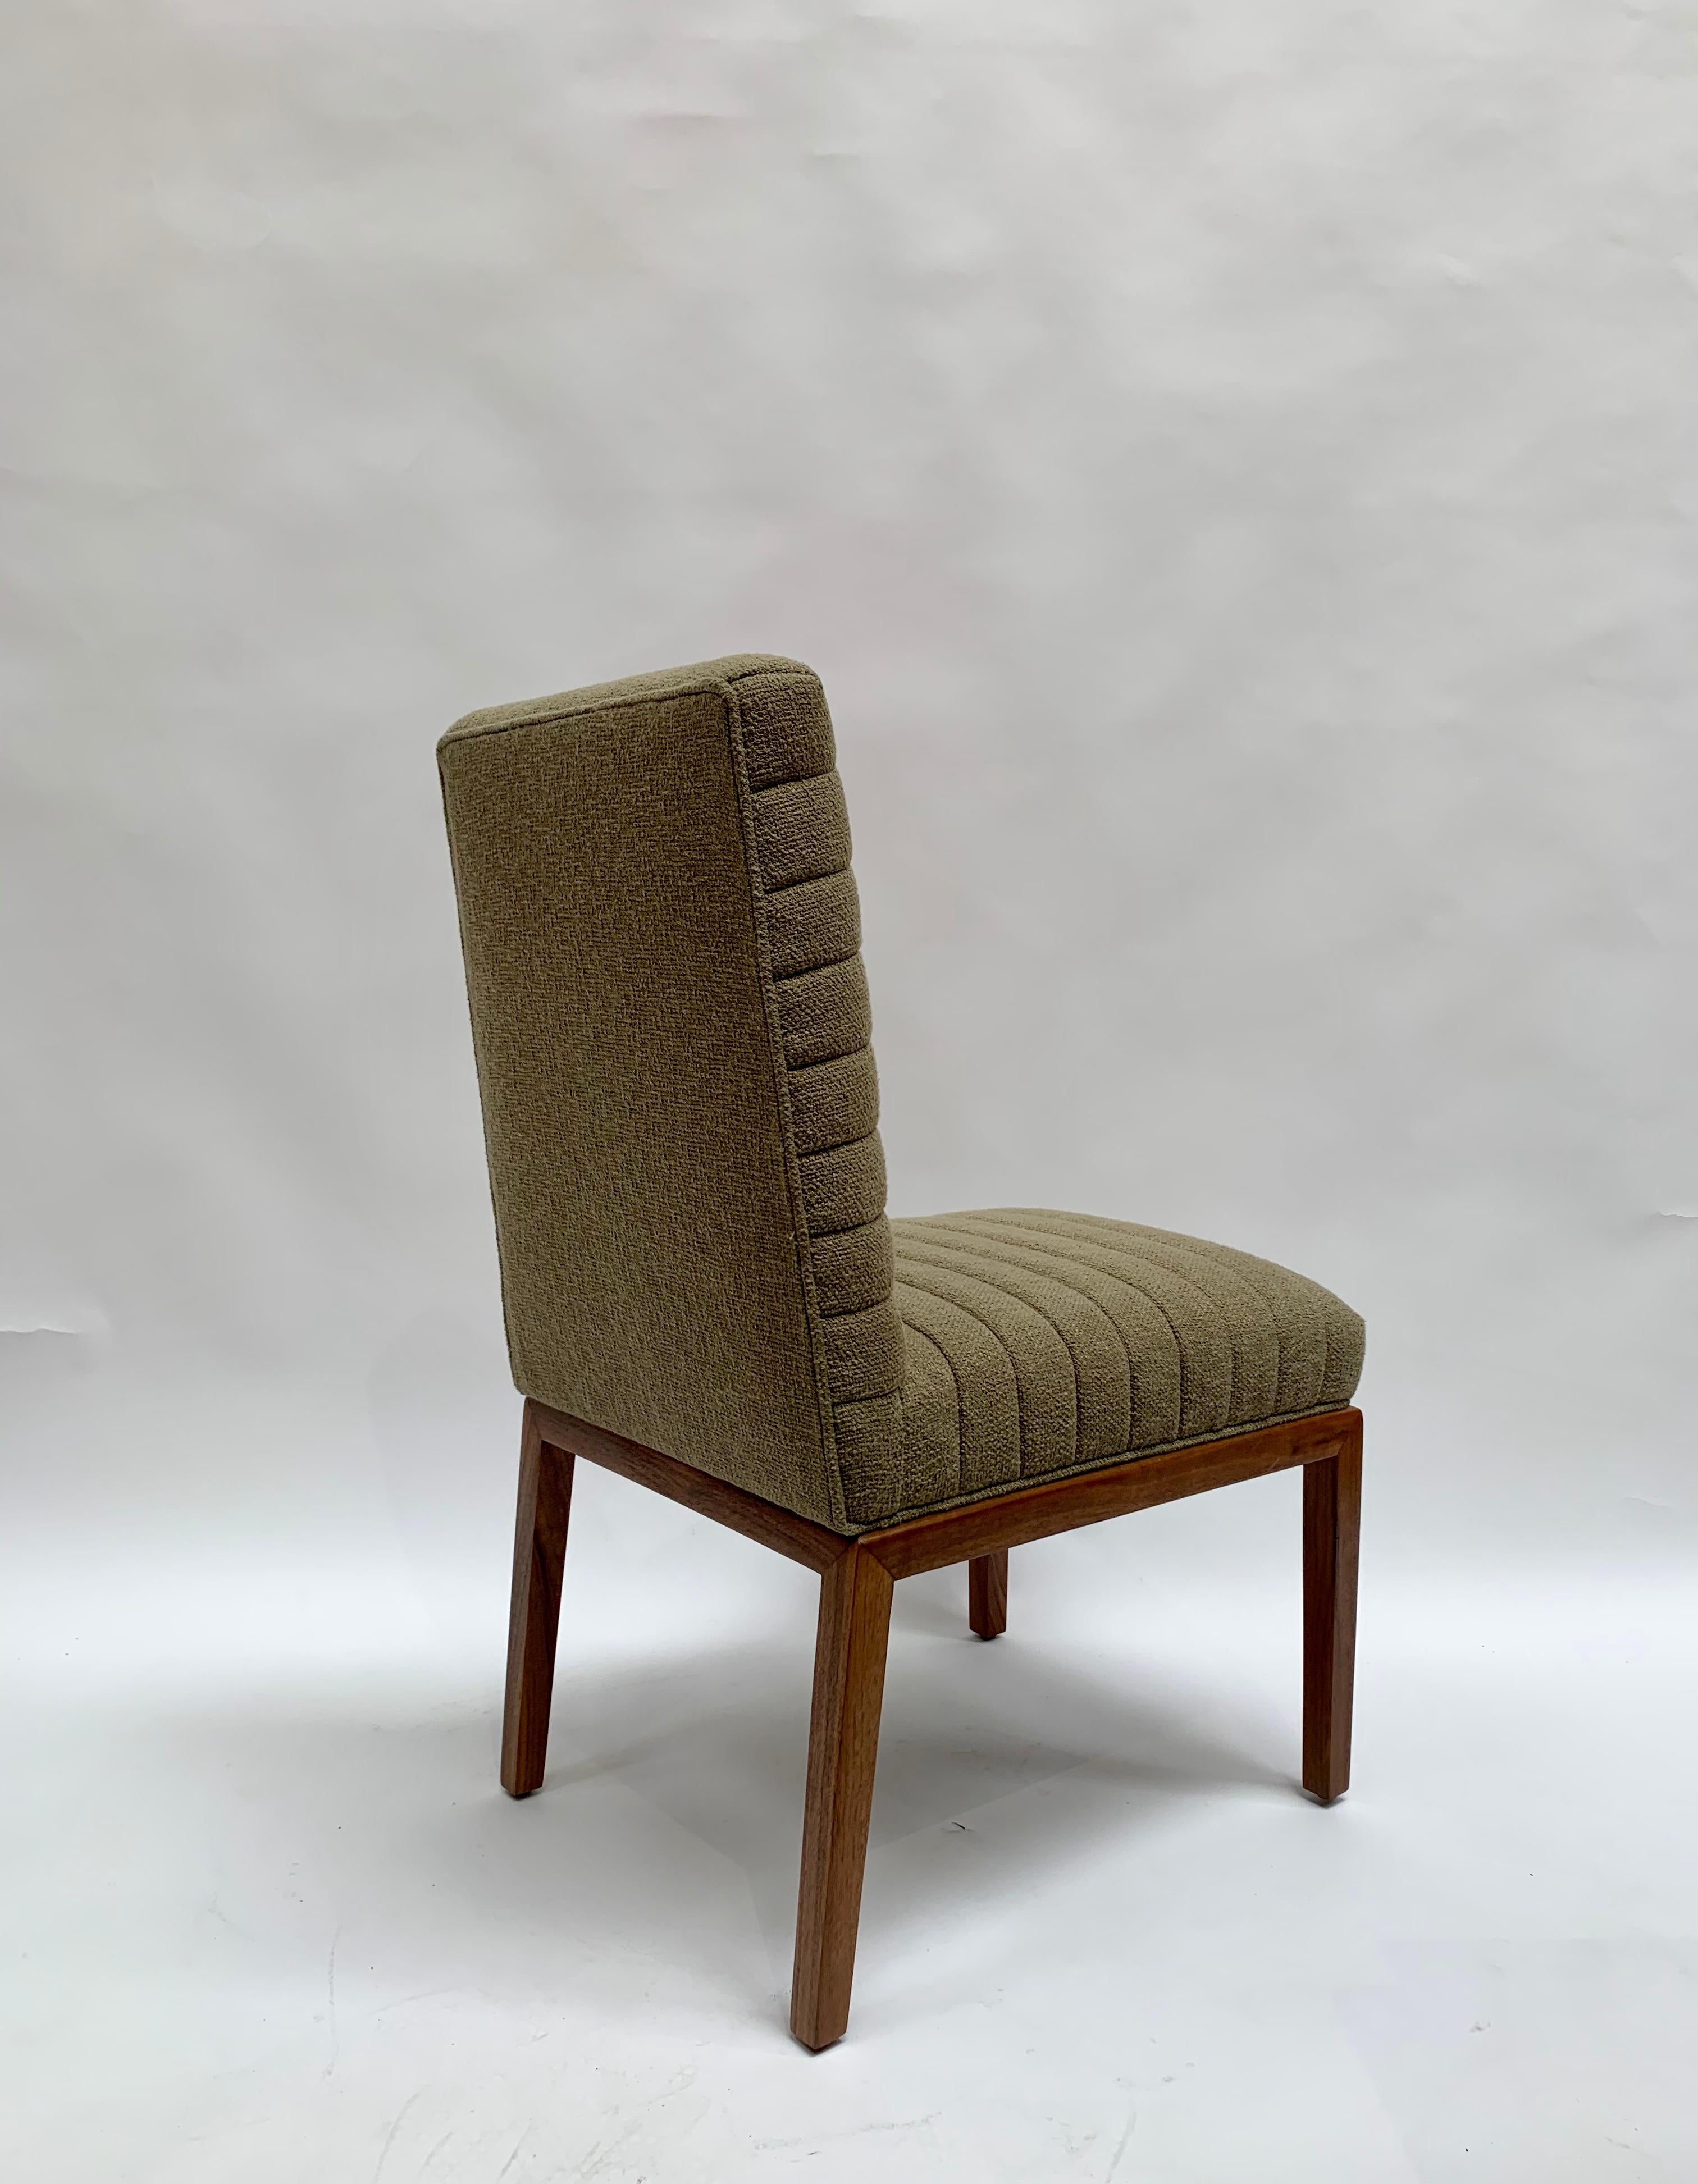 American Green Highback Shoreland Chair by Brian Paquette for Lawson-Fenning, In Stock